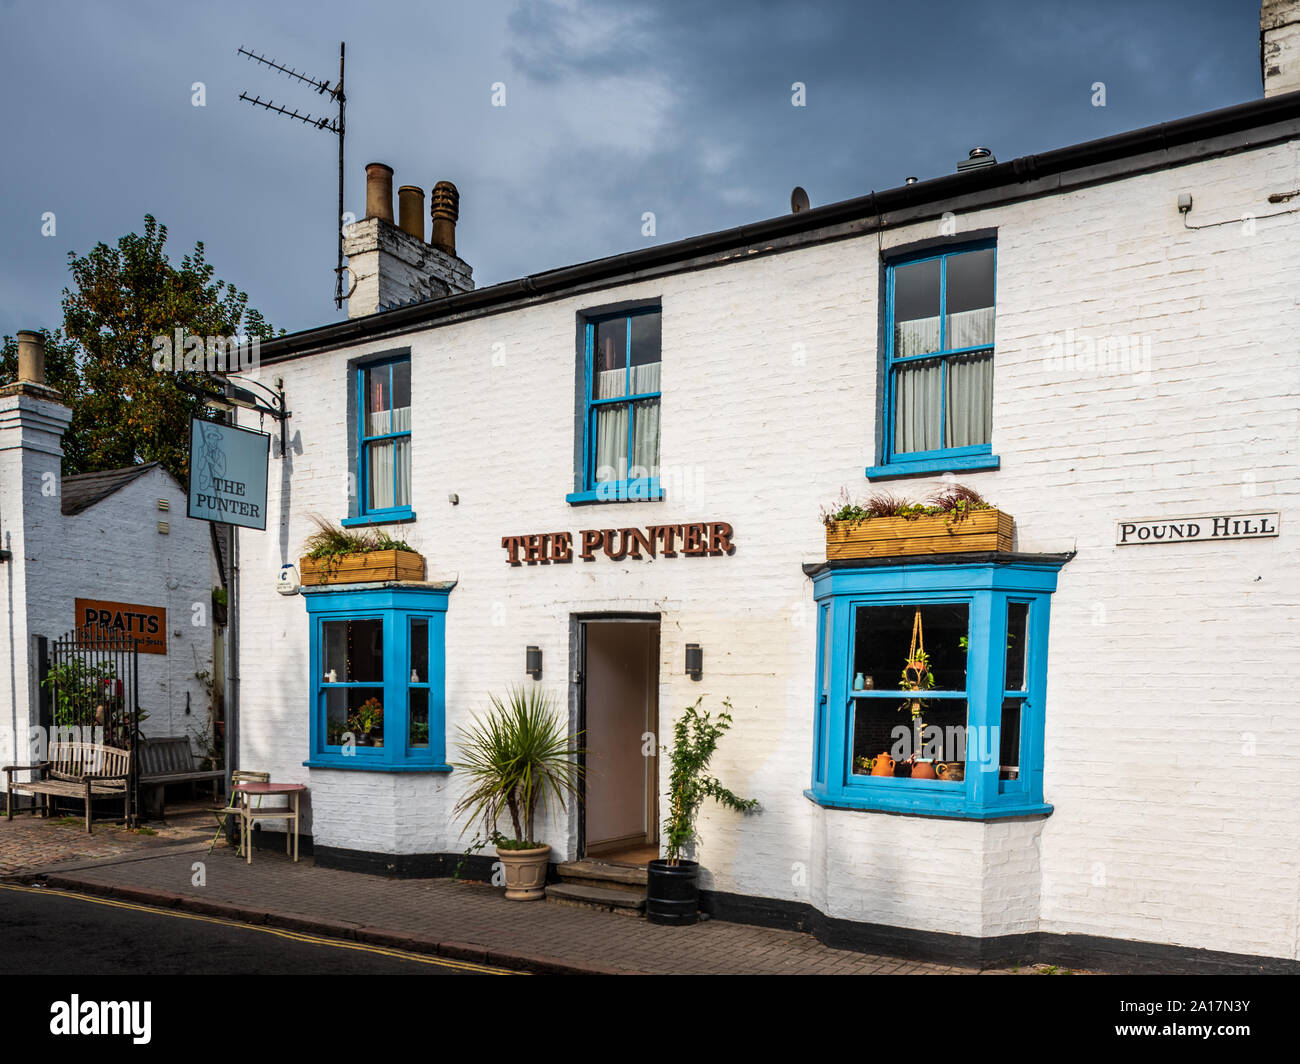 The Punter Pub on Pound Hill in Central Cambridge UK Stock Photo